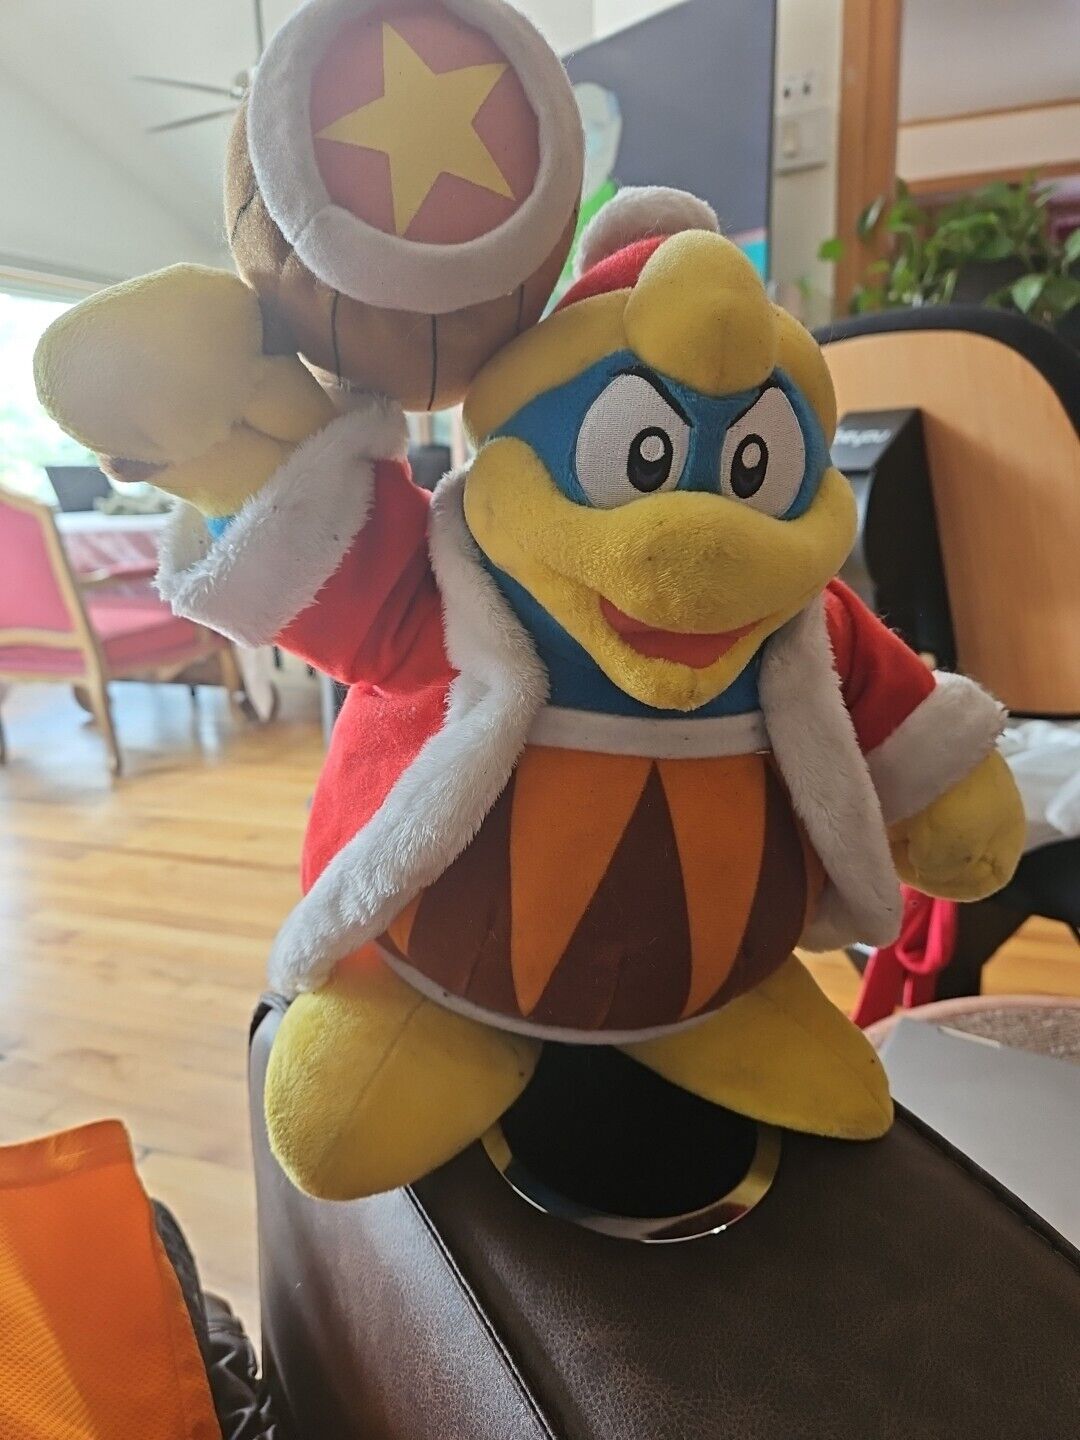 King Dedede Sanei Plush, Kirby, 2009, 13 Inches, Used